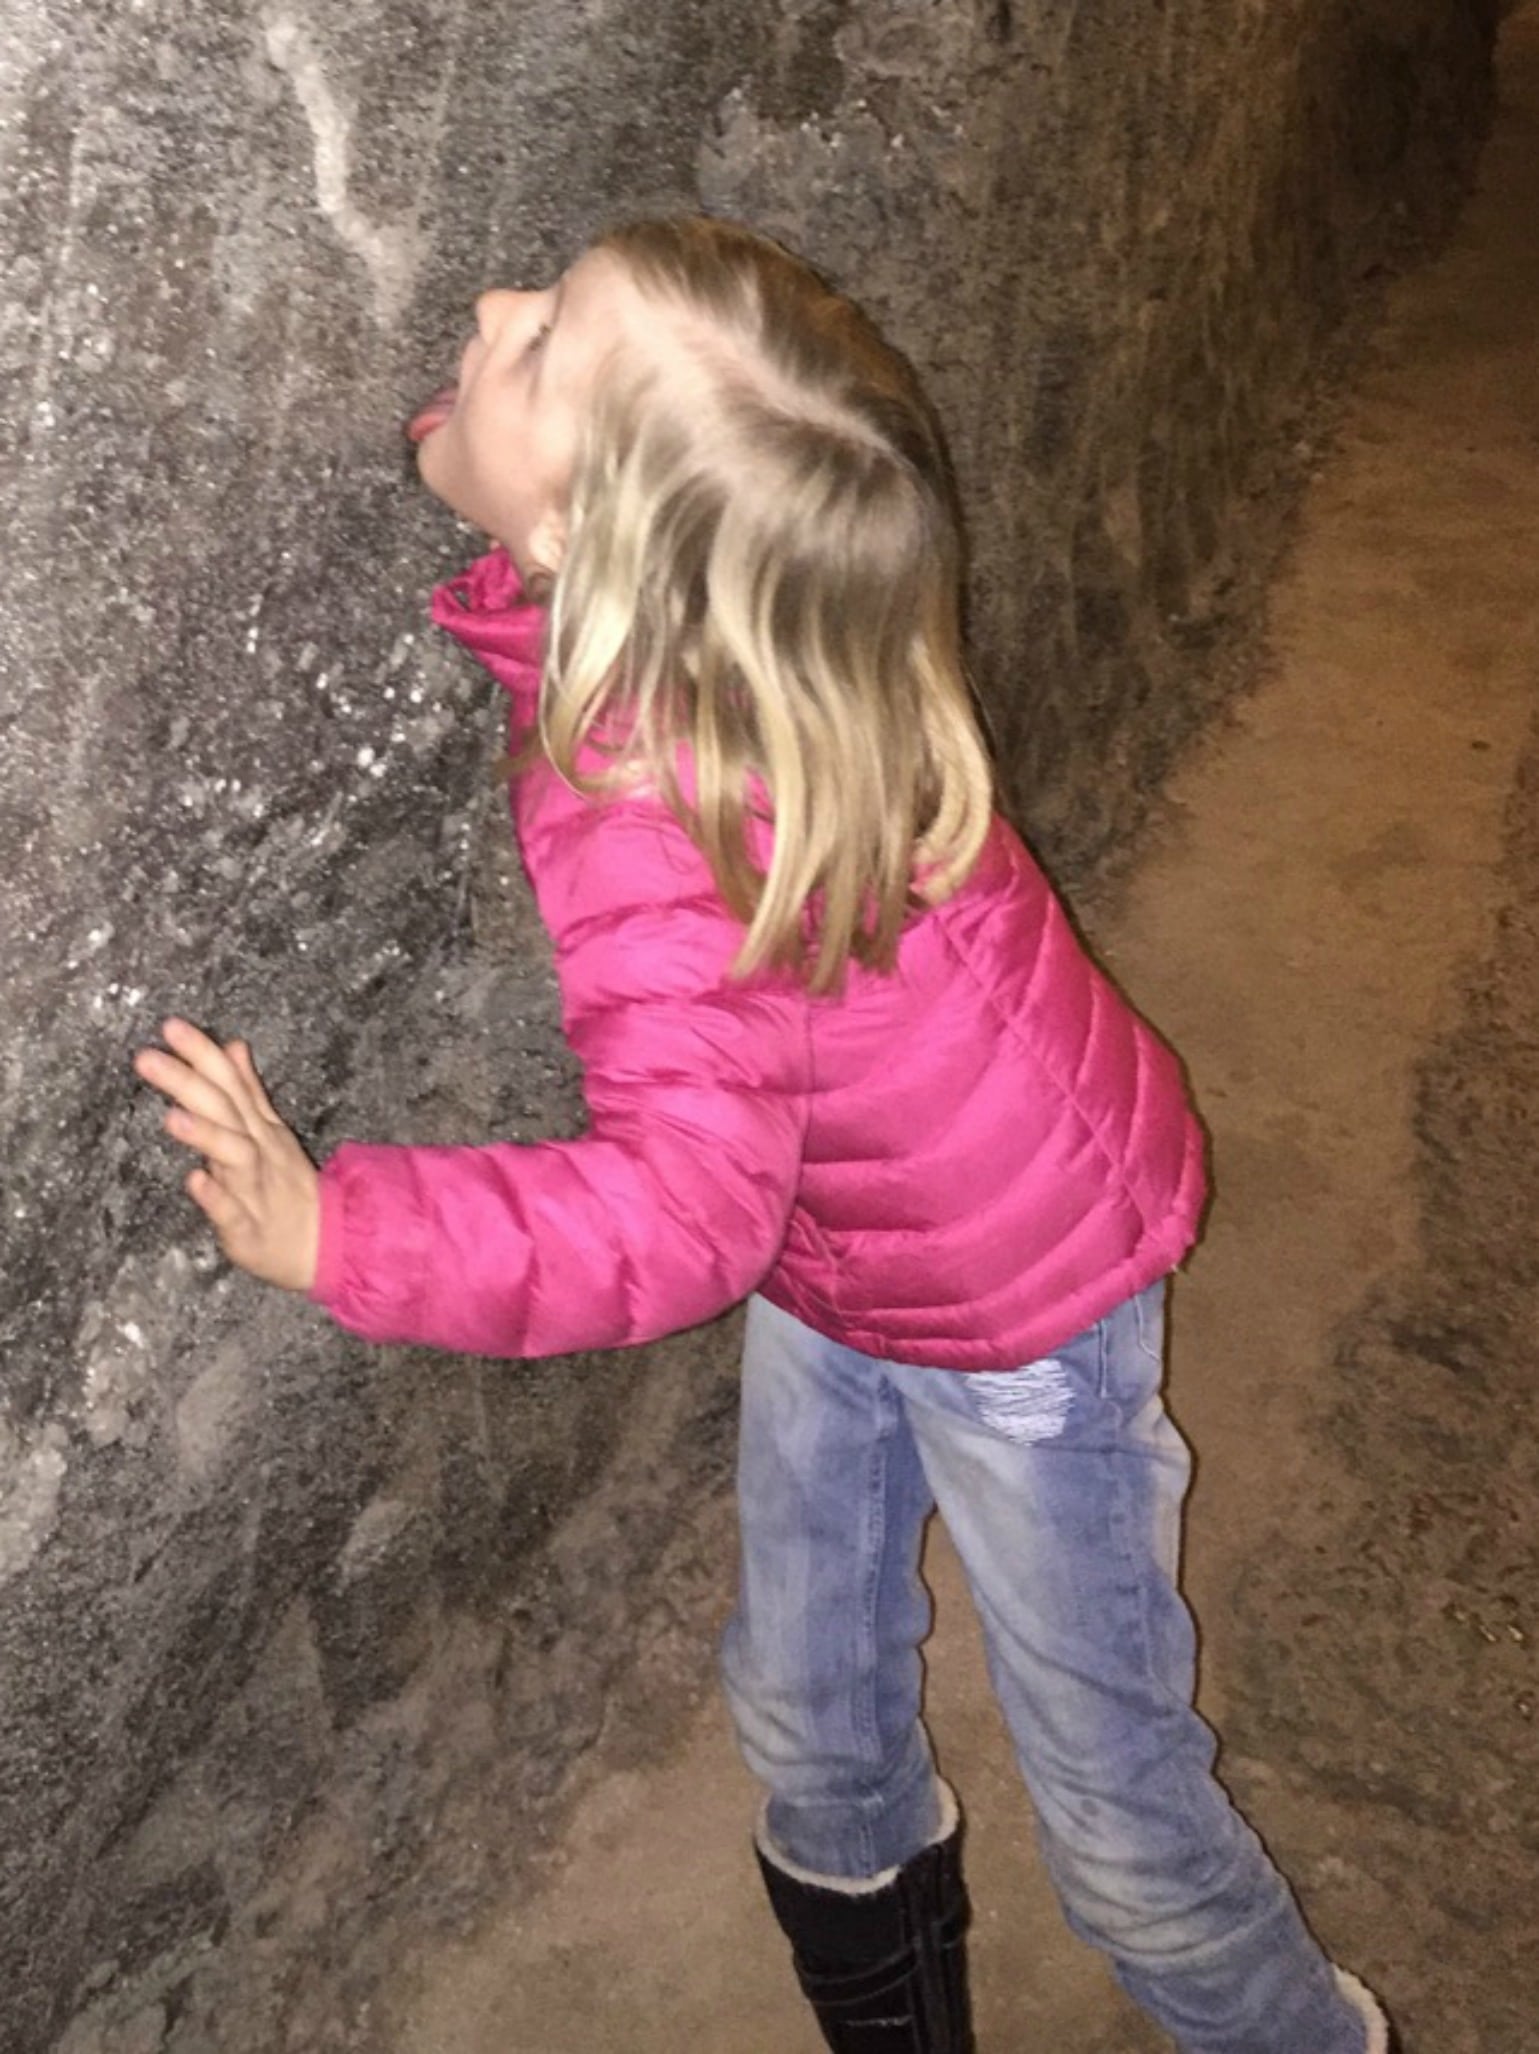 Licking the walls at the salt mine.